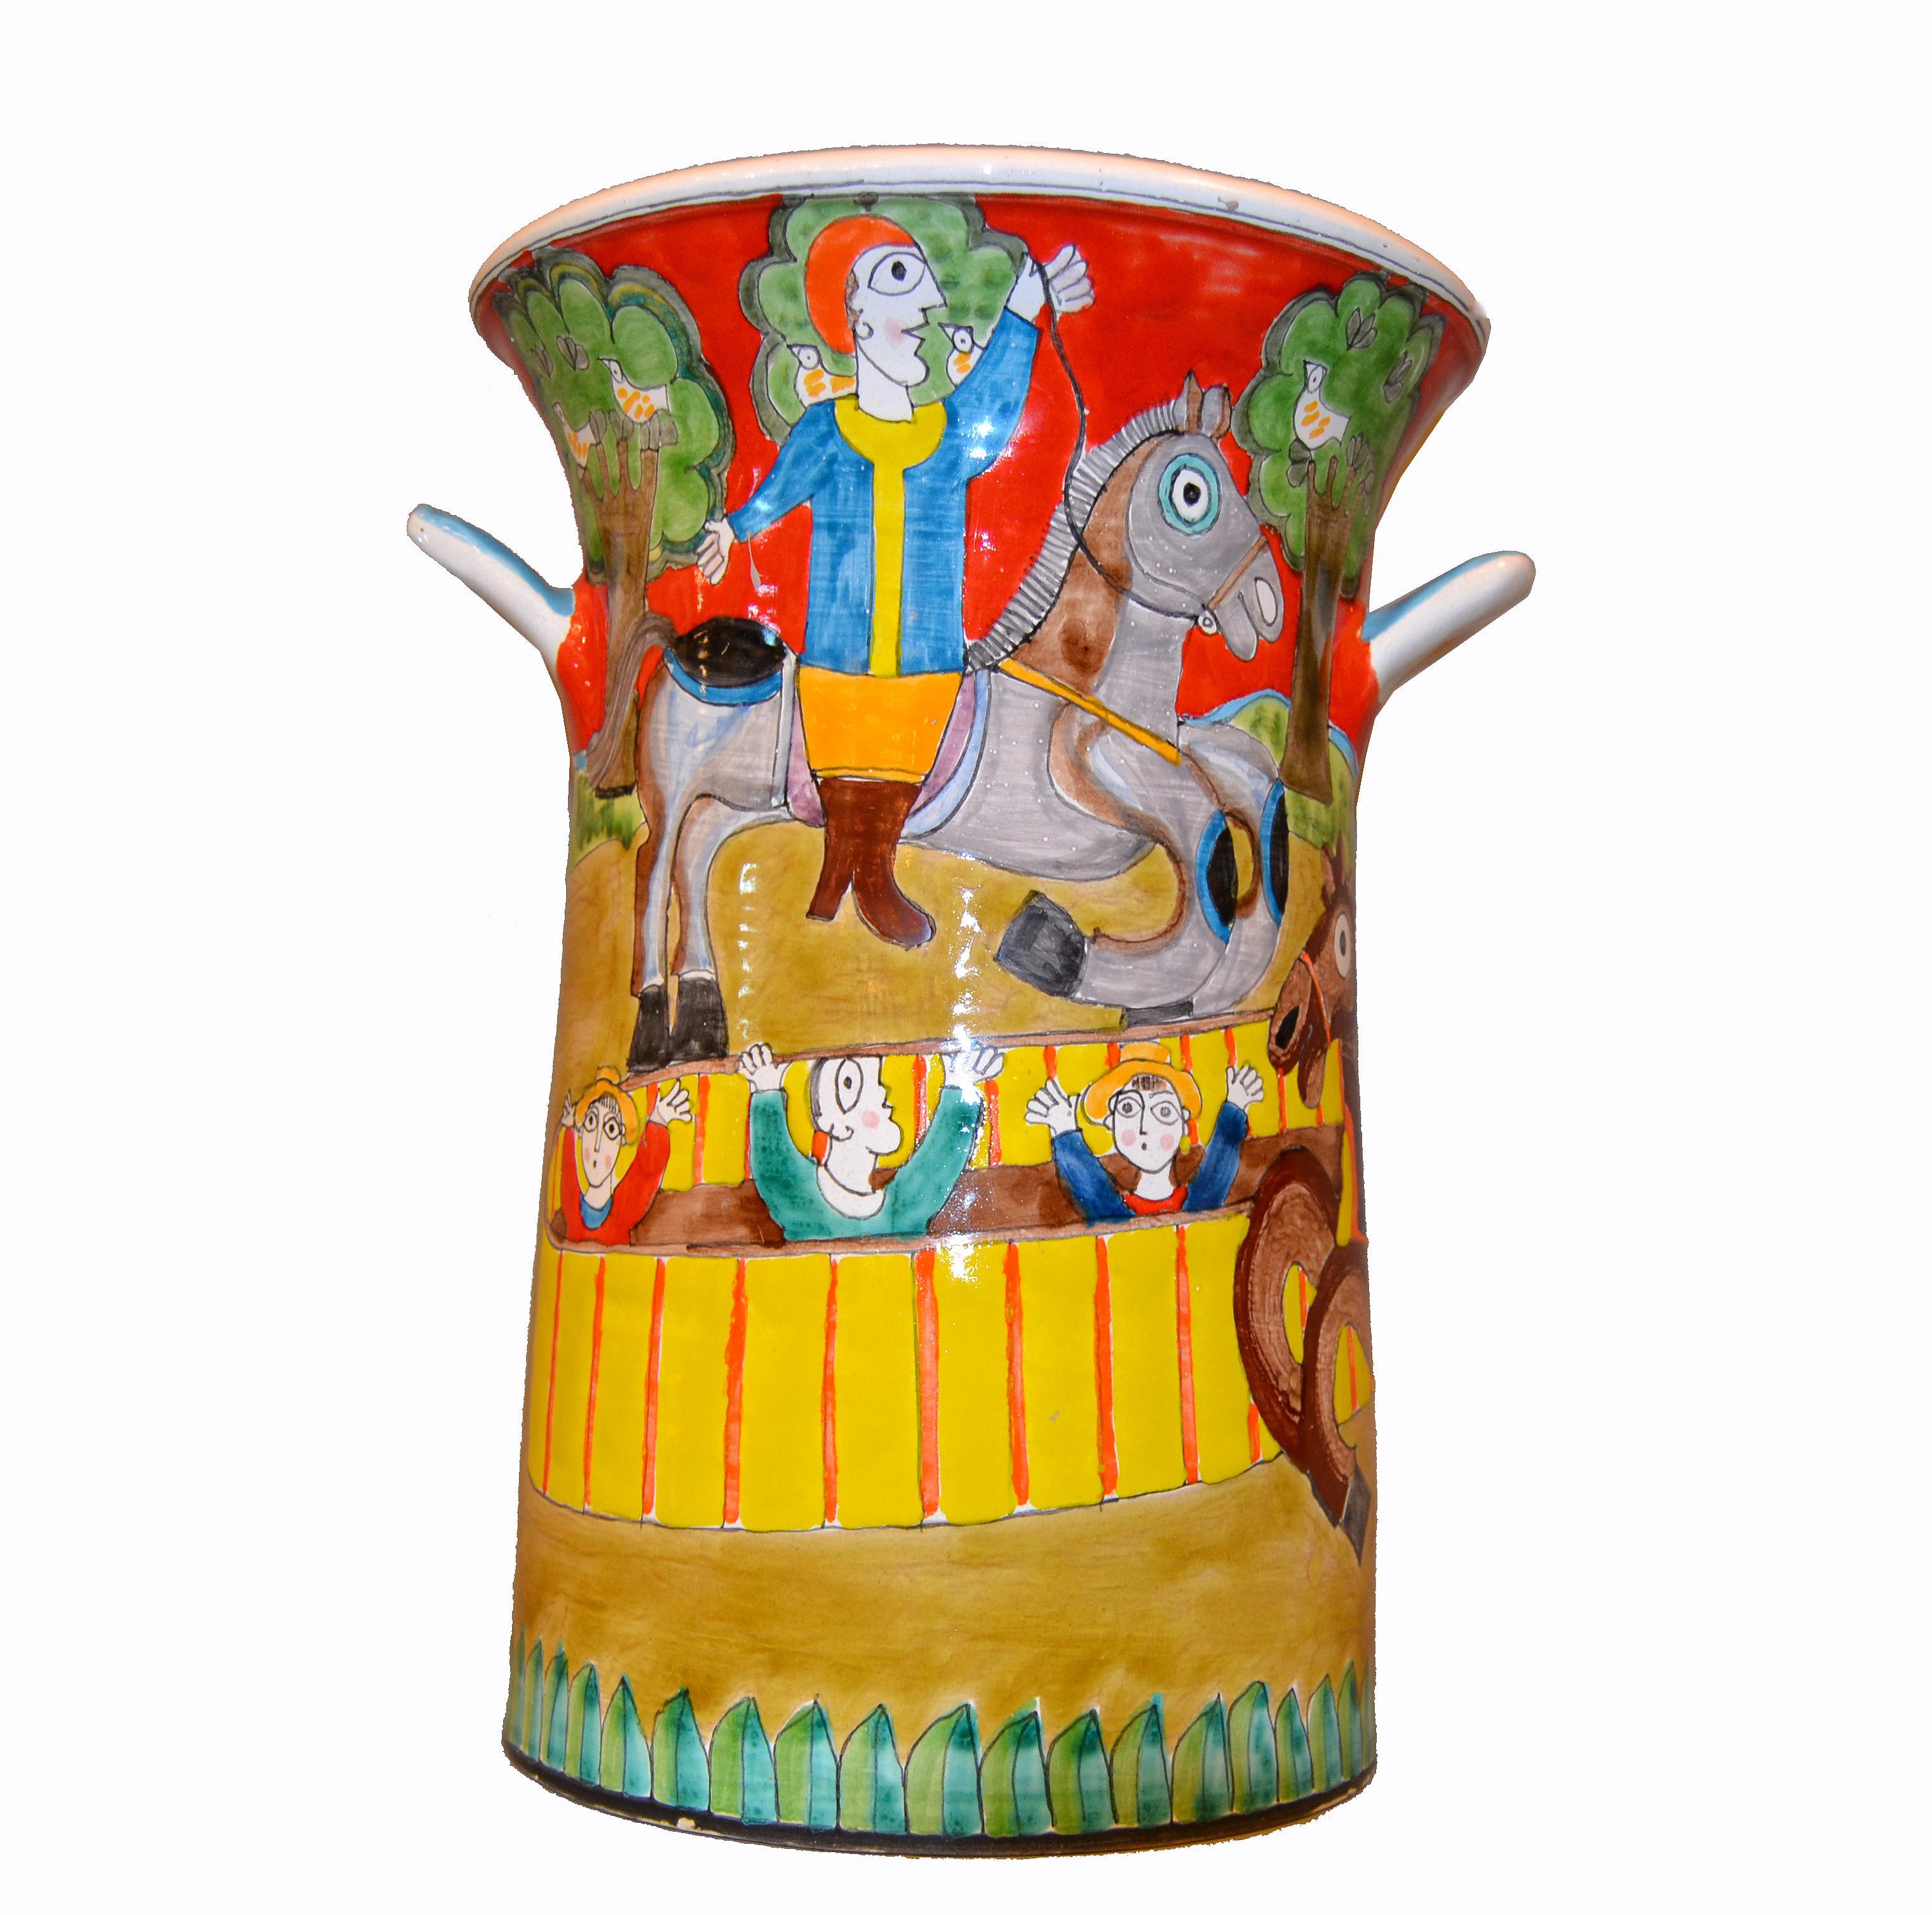 A glazed and colorful Giovanni Desimone hand painted pottery vase or vessel, circa 1969 from Italy.
The painting depicts two men on horses riding in a circus arena and people applauding them.
The vase is 14 inches high and 10 inches in diameter and